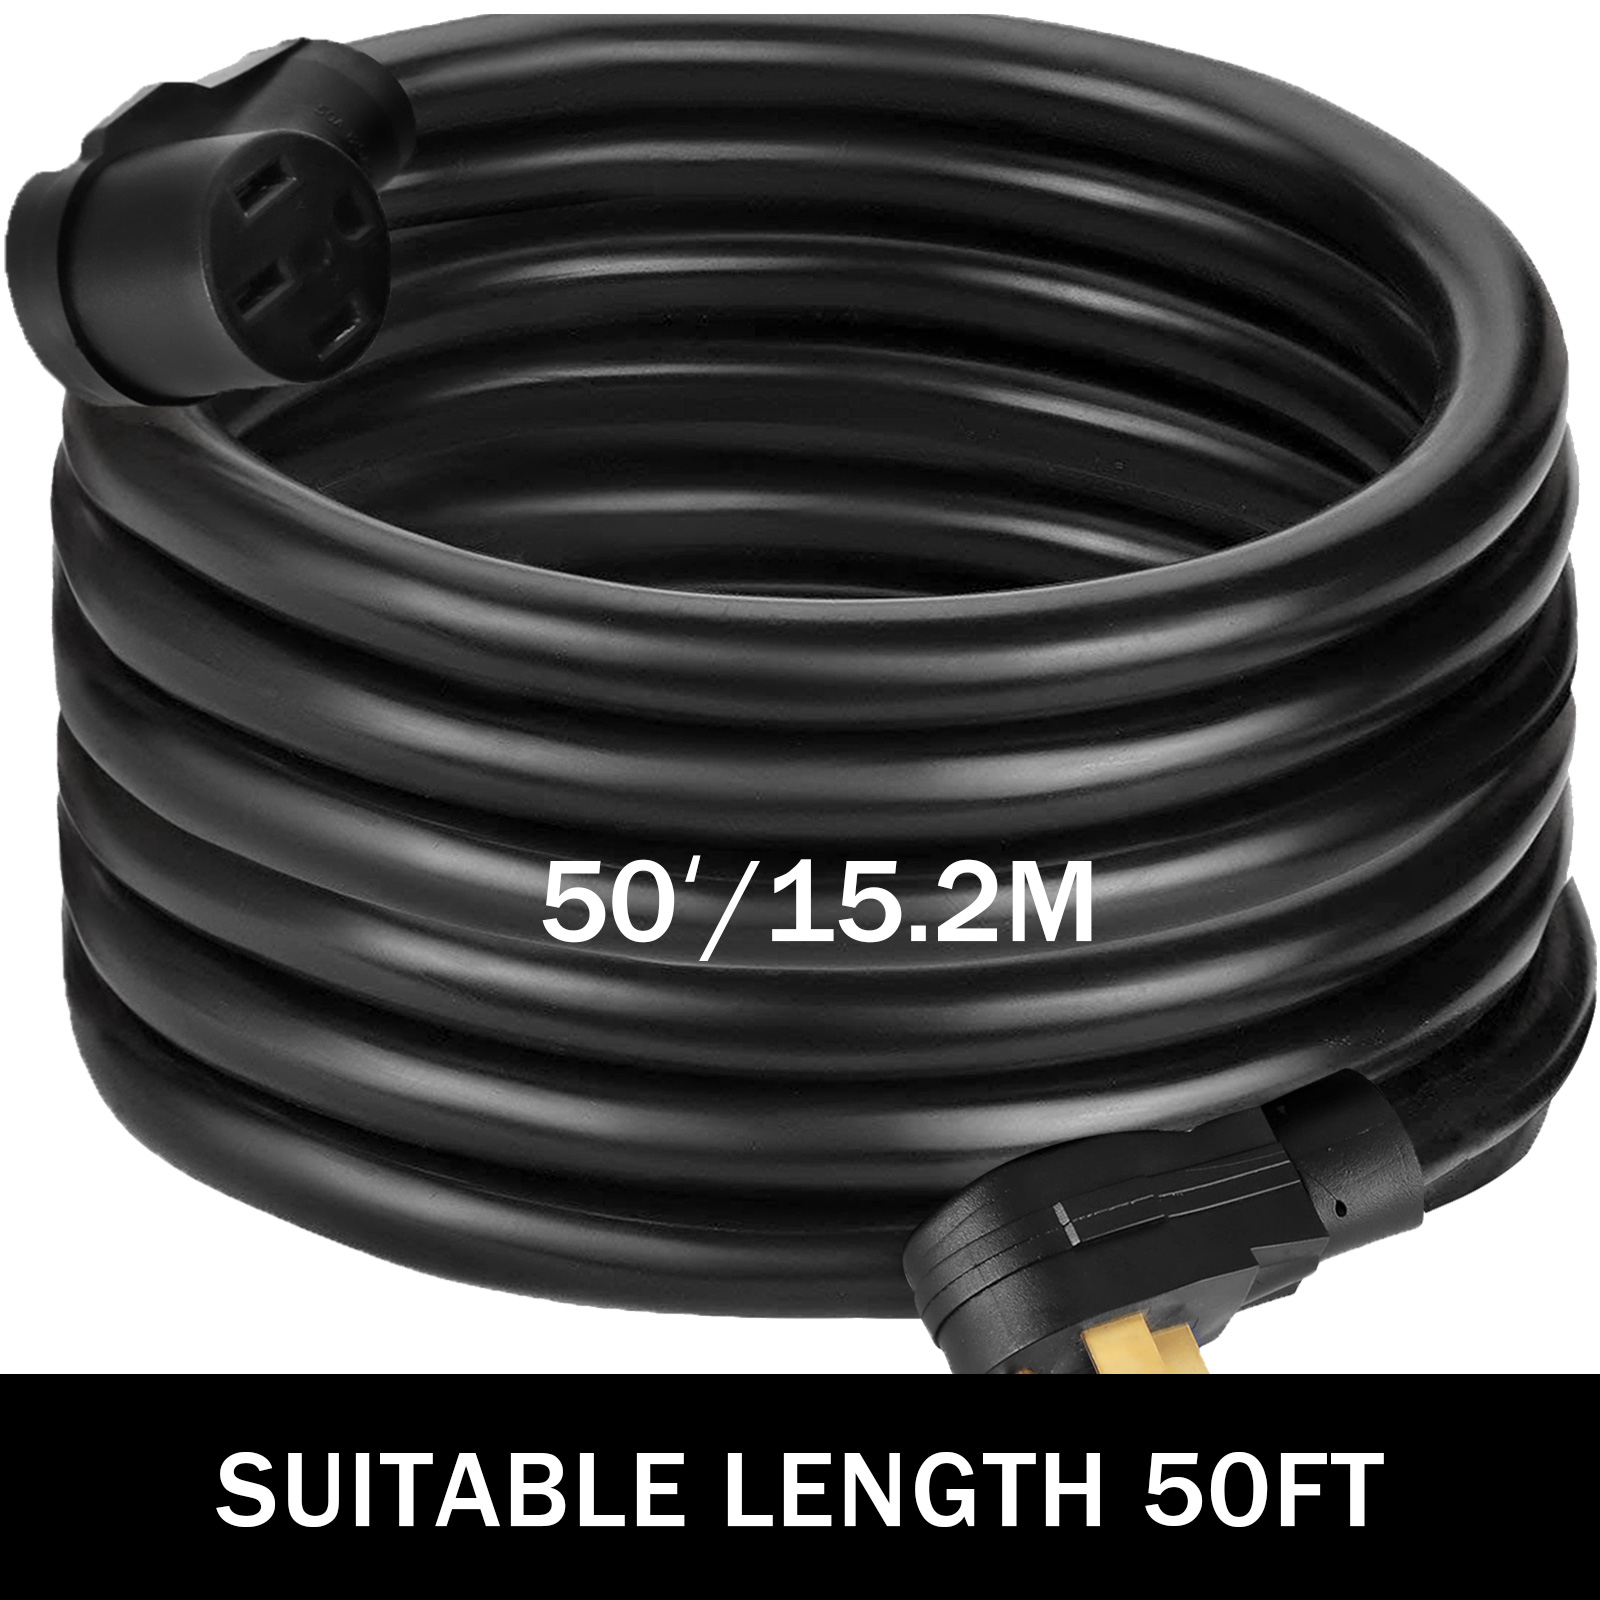 RV Extension Cord 15ft 50amp Power Cable Rain Proof for Trailer Motorhome Camper 